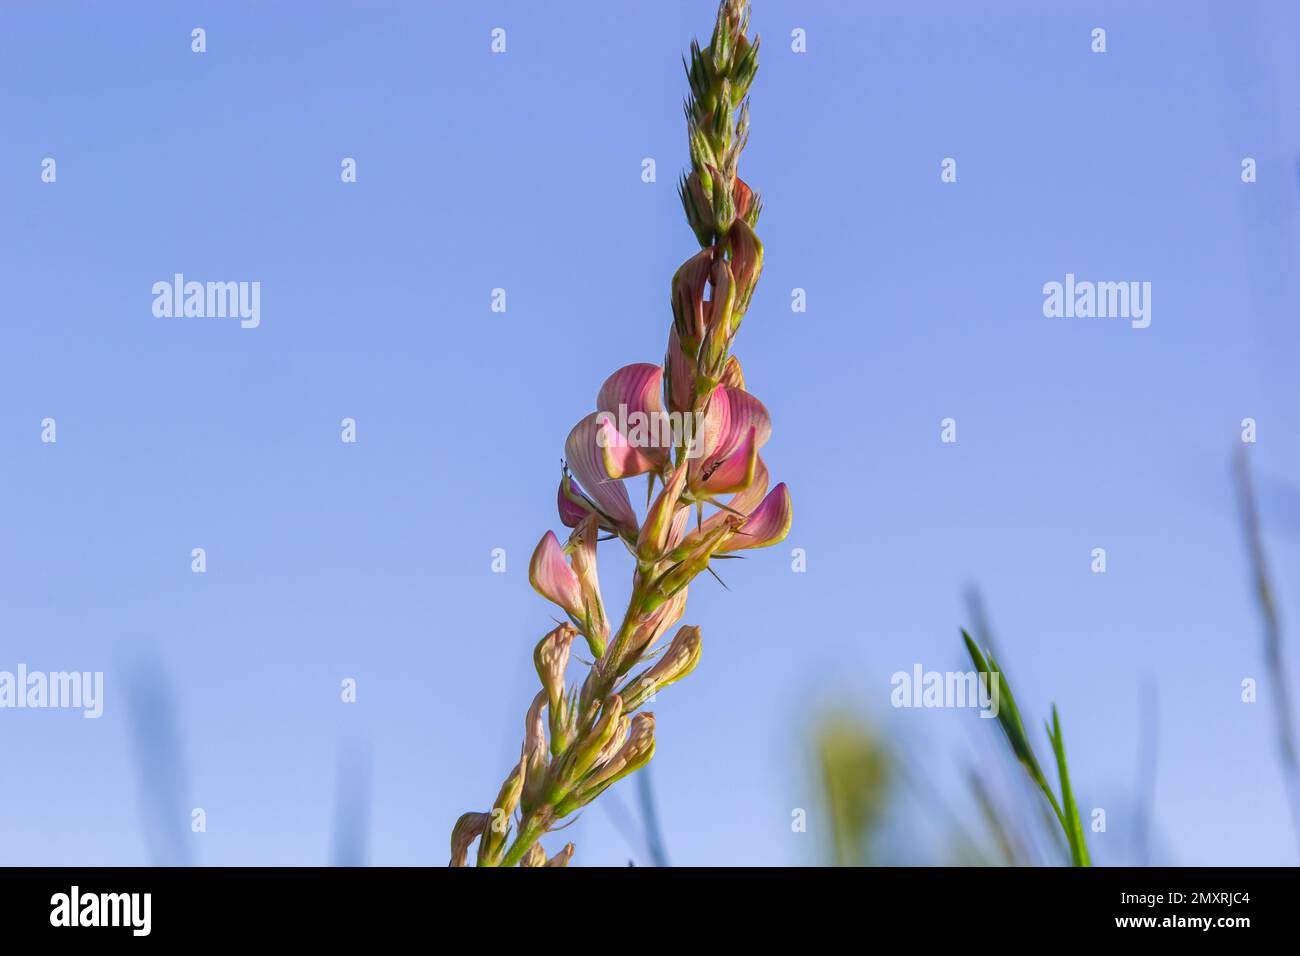 Sainfoin, Onobrychis viciifolia, growing in the grassland. Common sainfoin fowering in summer. Stock Photo